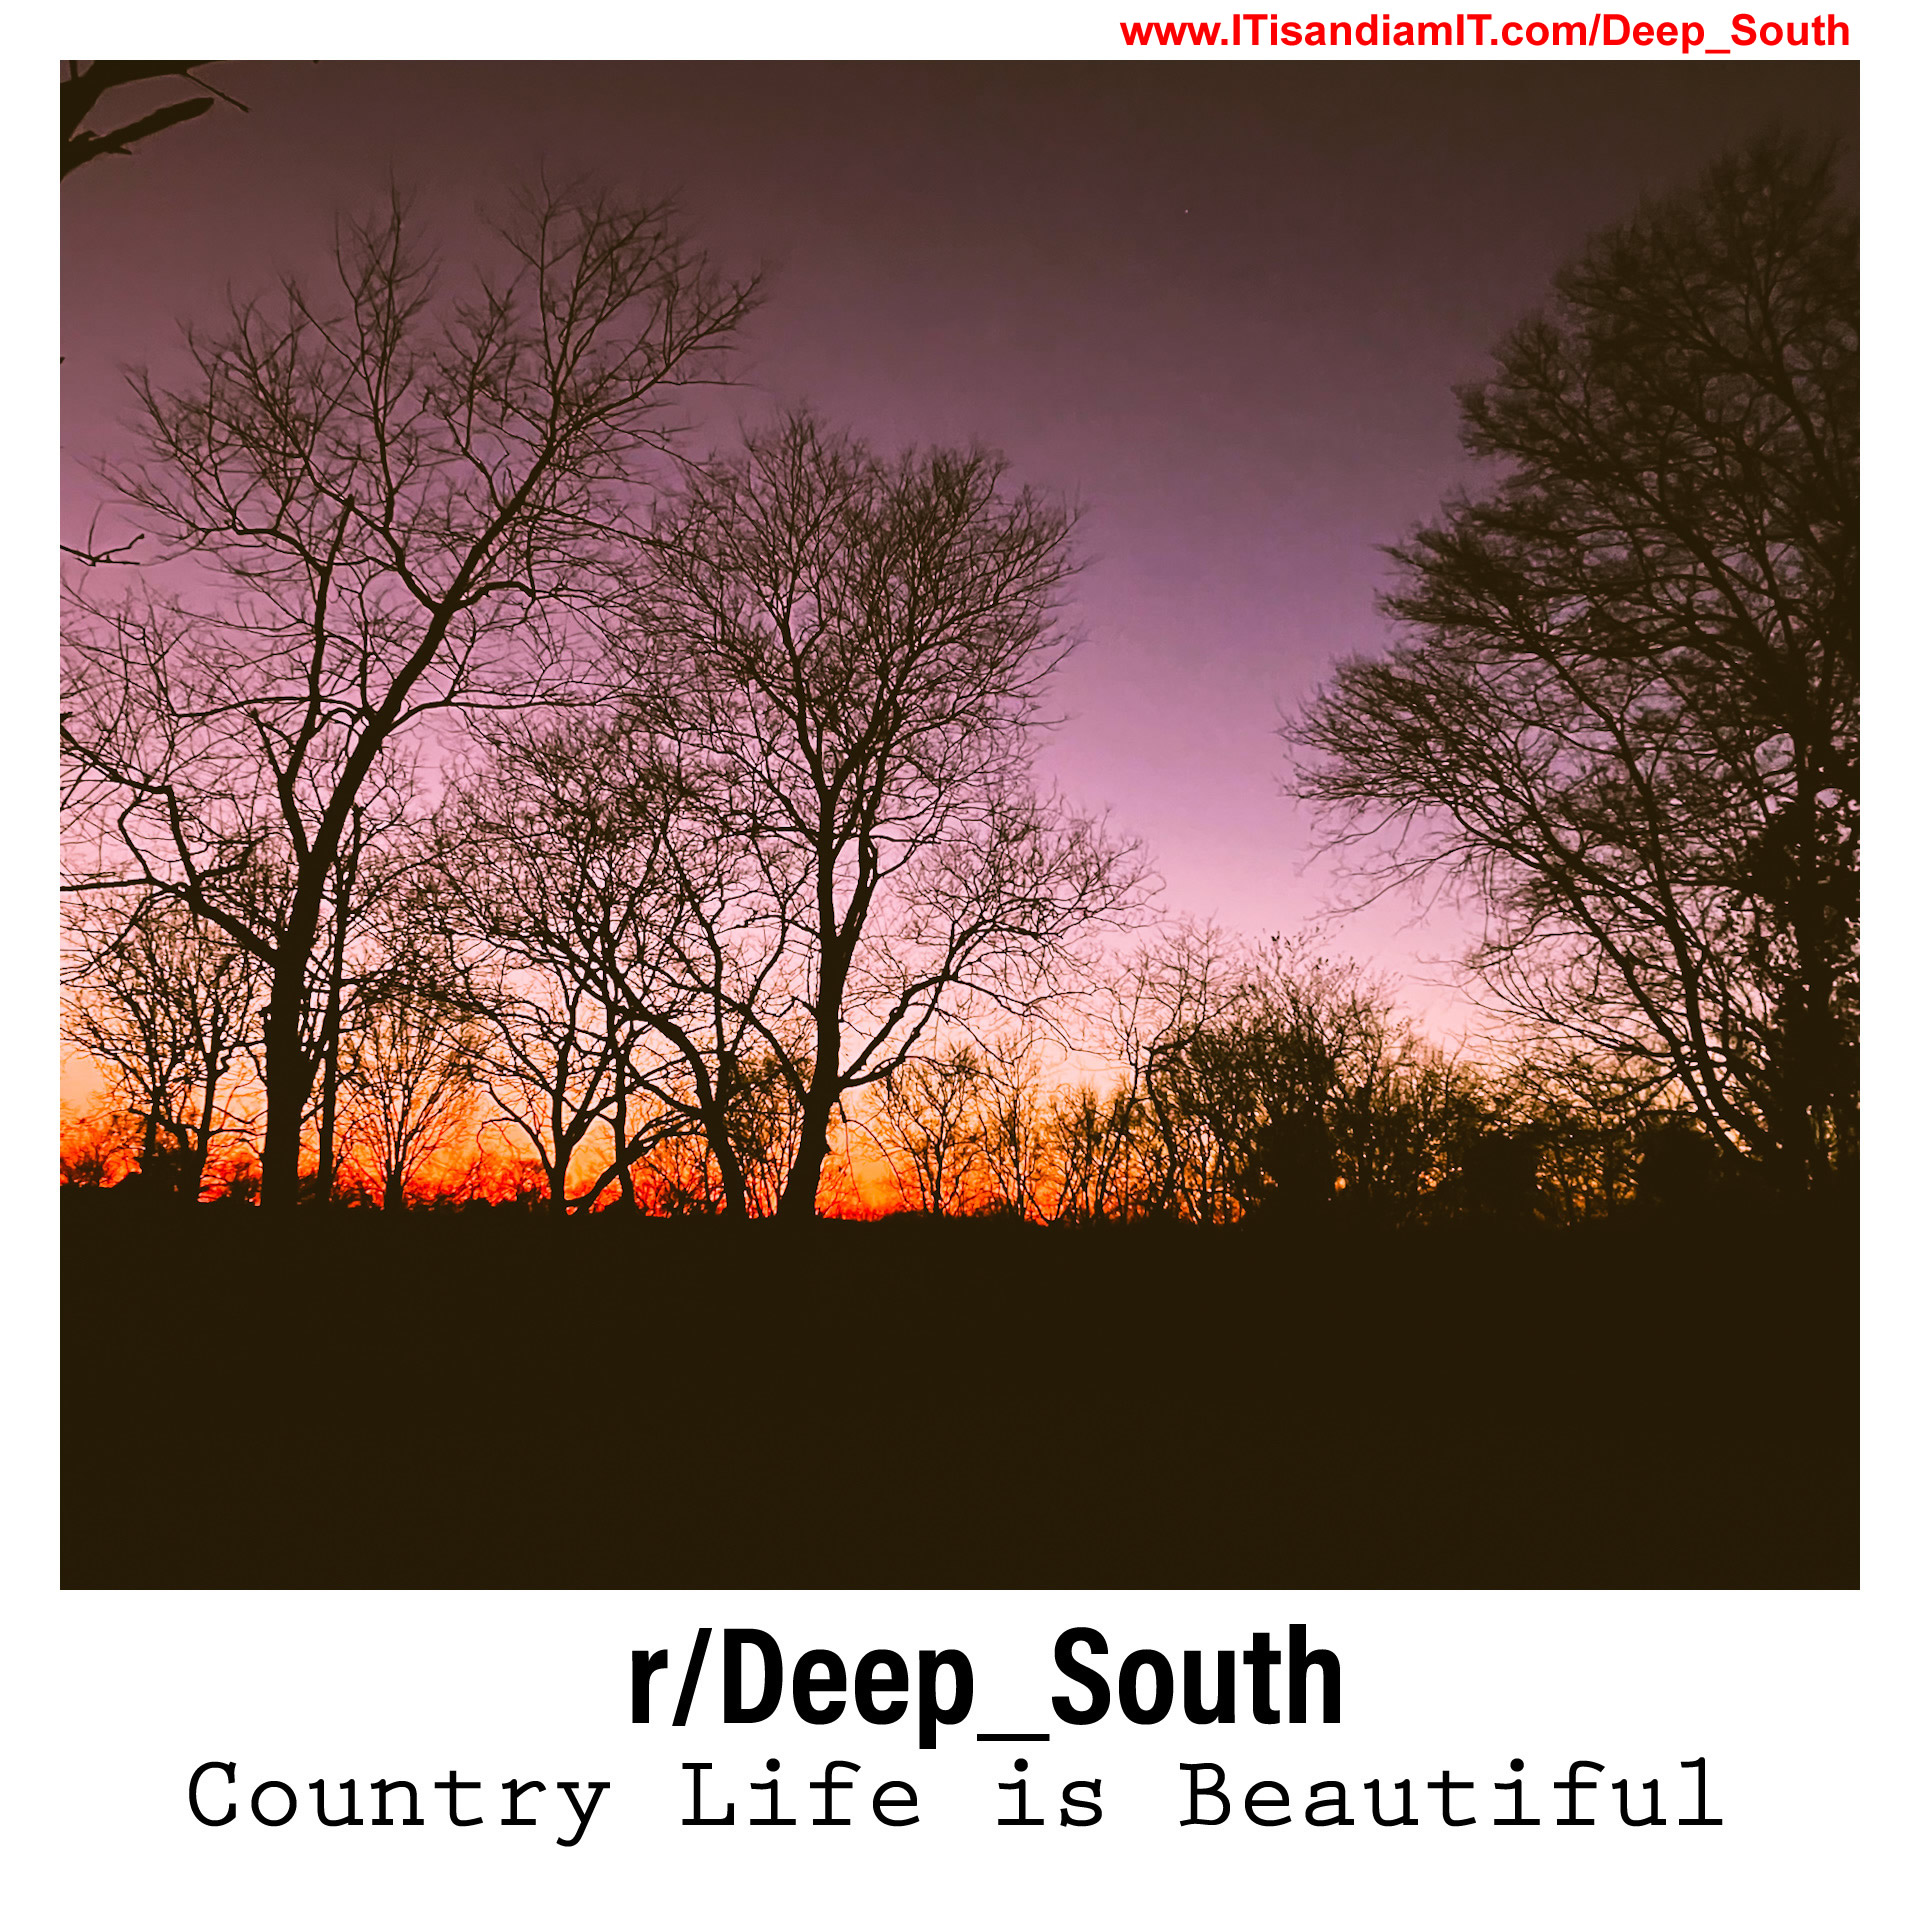 Deep South is Docs Newest Reddit Community Click the Image to visit this Community on Reddit.